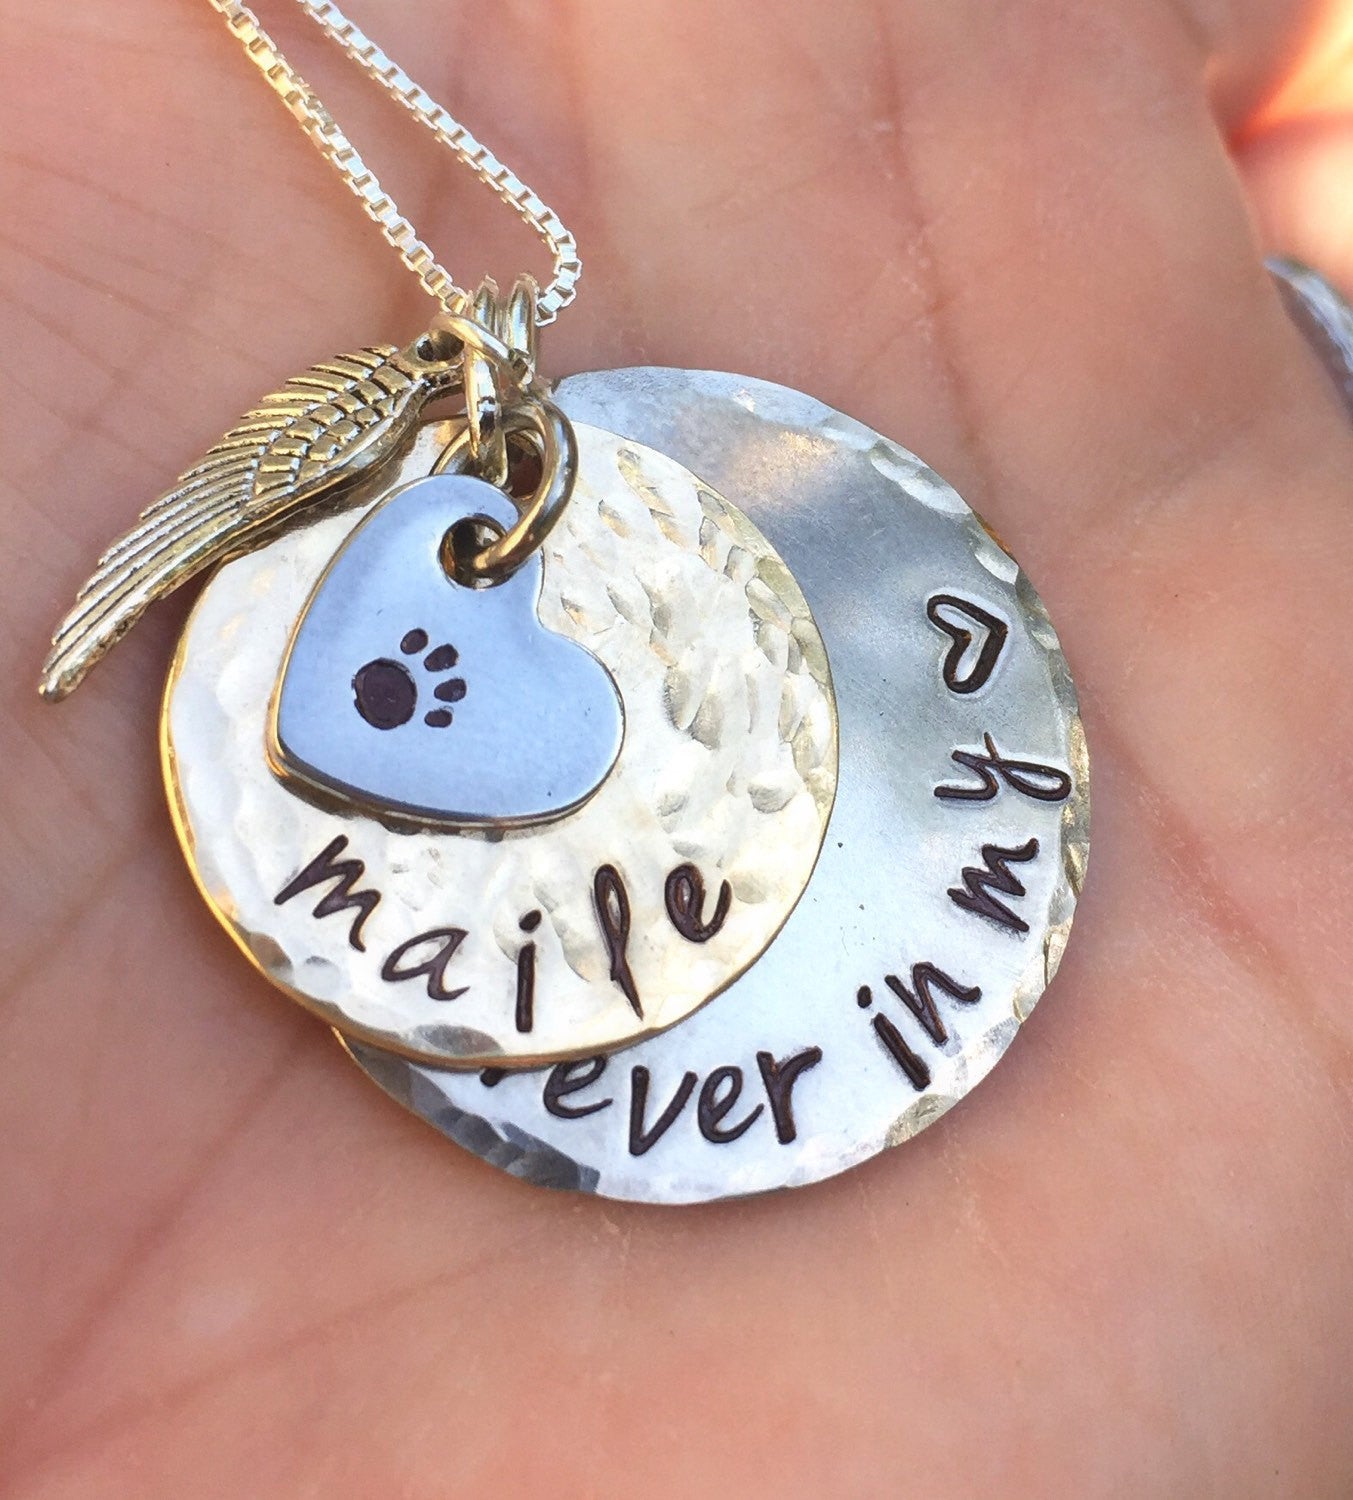 Pet Memorial Necklace - Natashaaloha, jewelry, bracelets, necklace, keychains, fishing lures, gifts for men, charms, personalized, 